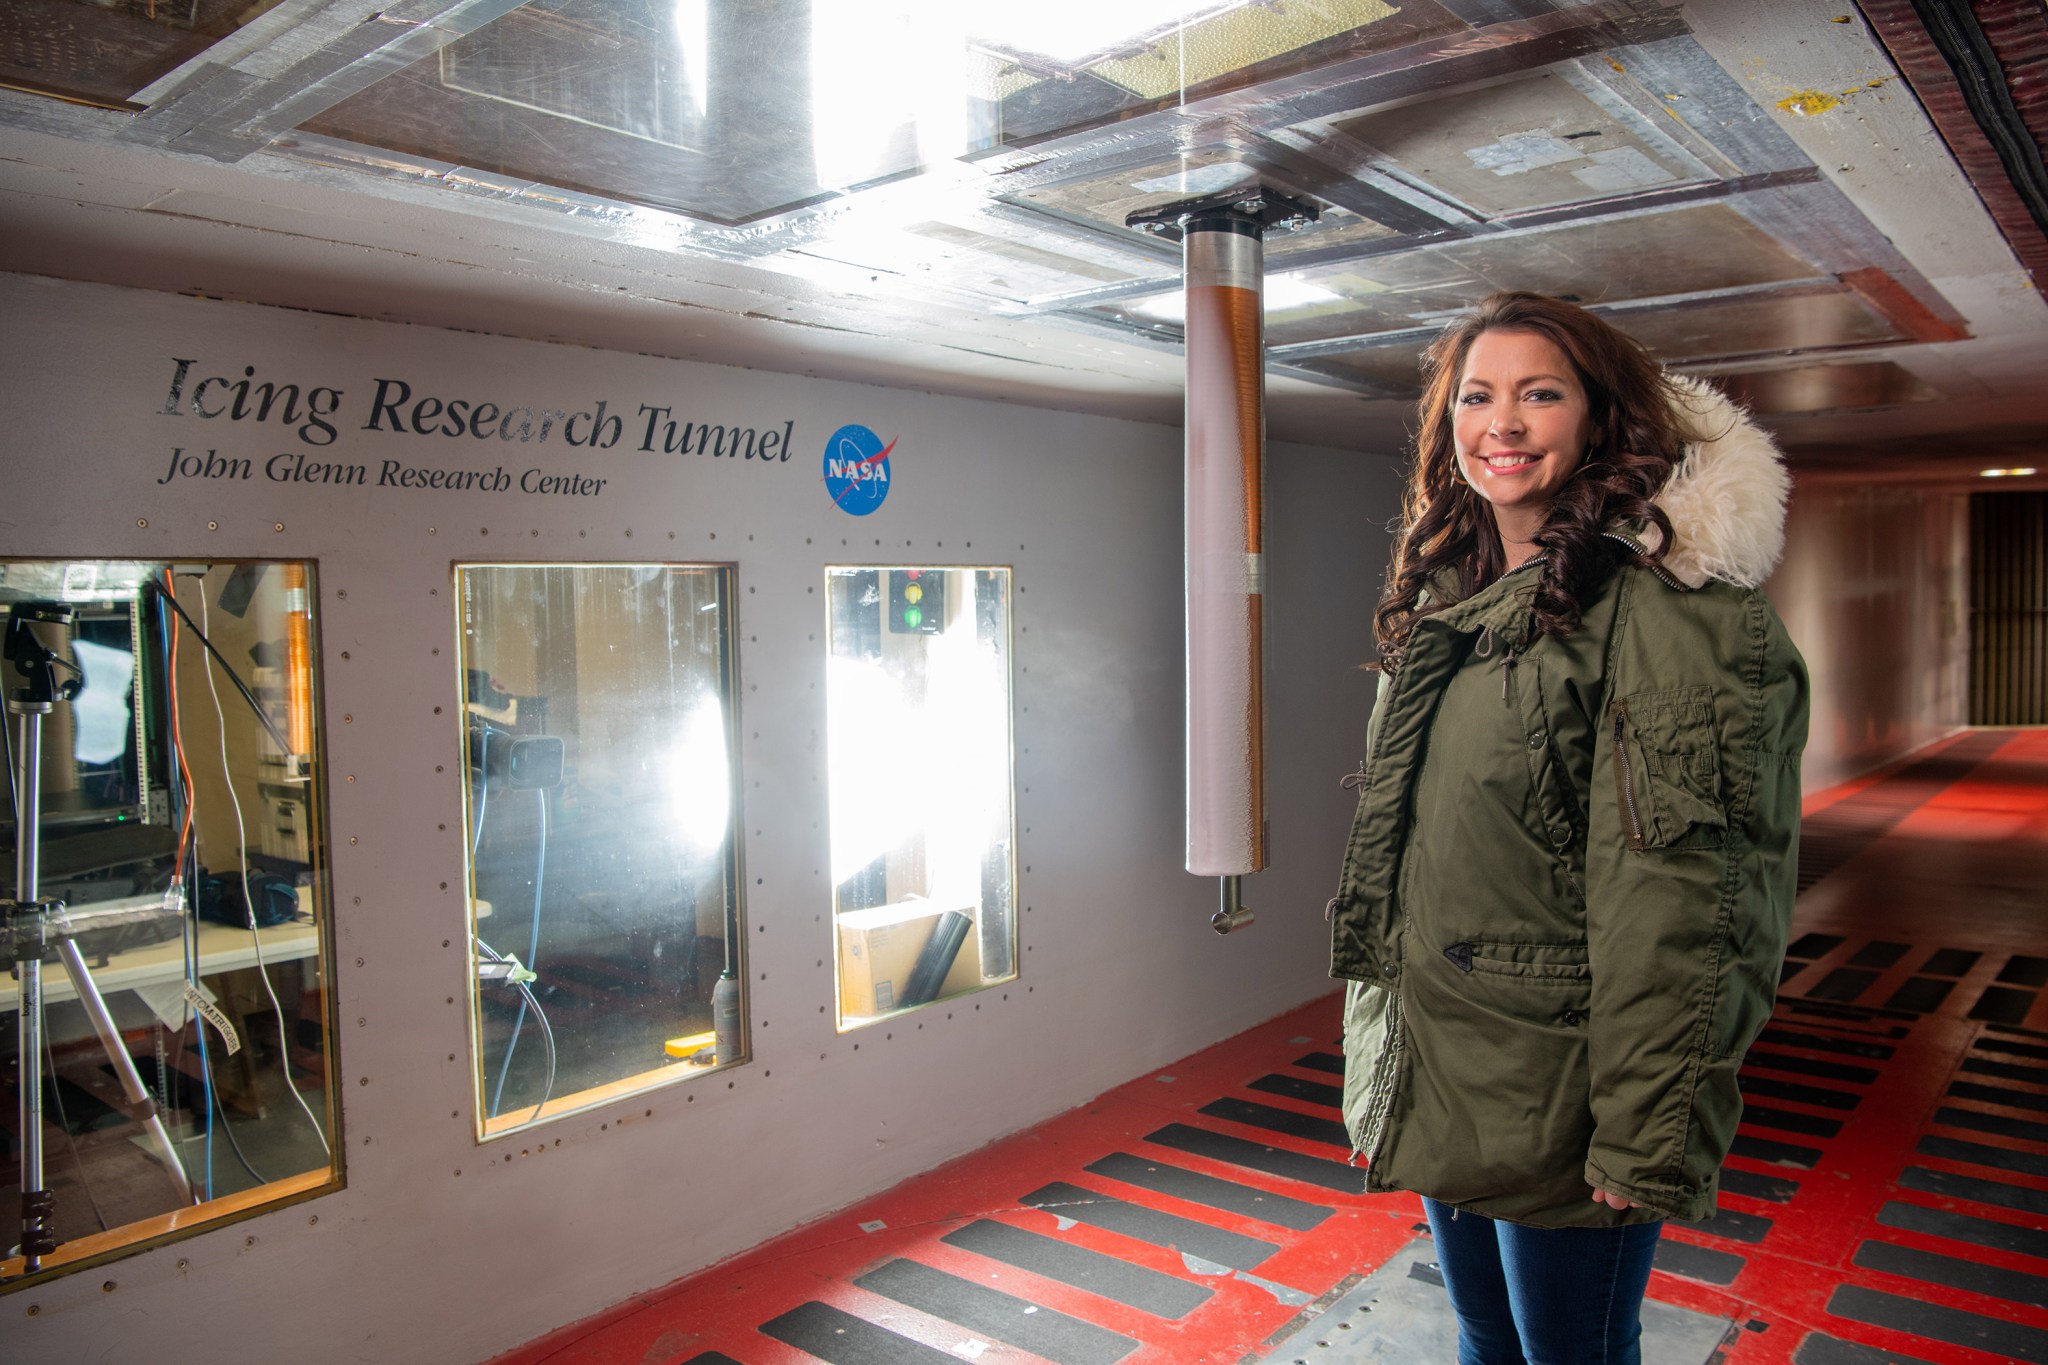 Smiling female researcher wearing a parka poses inside the icing research tunnel at Glenn Research Center